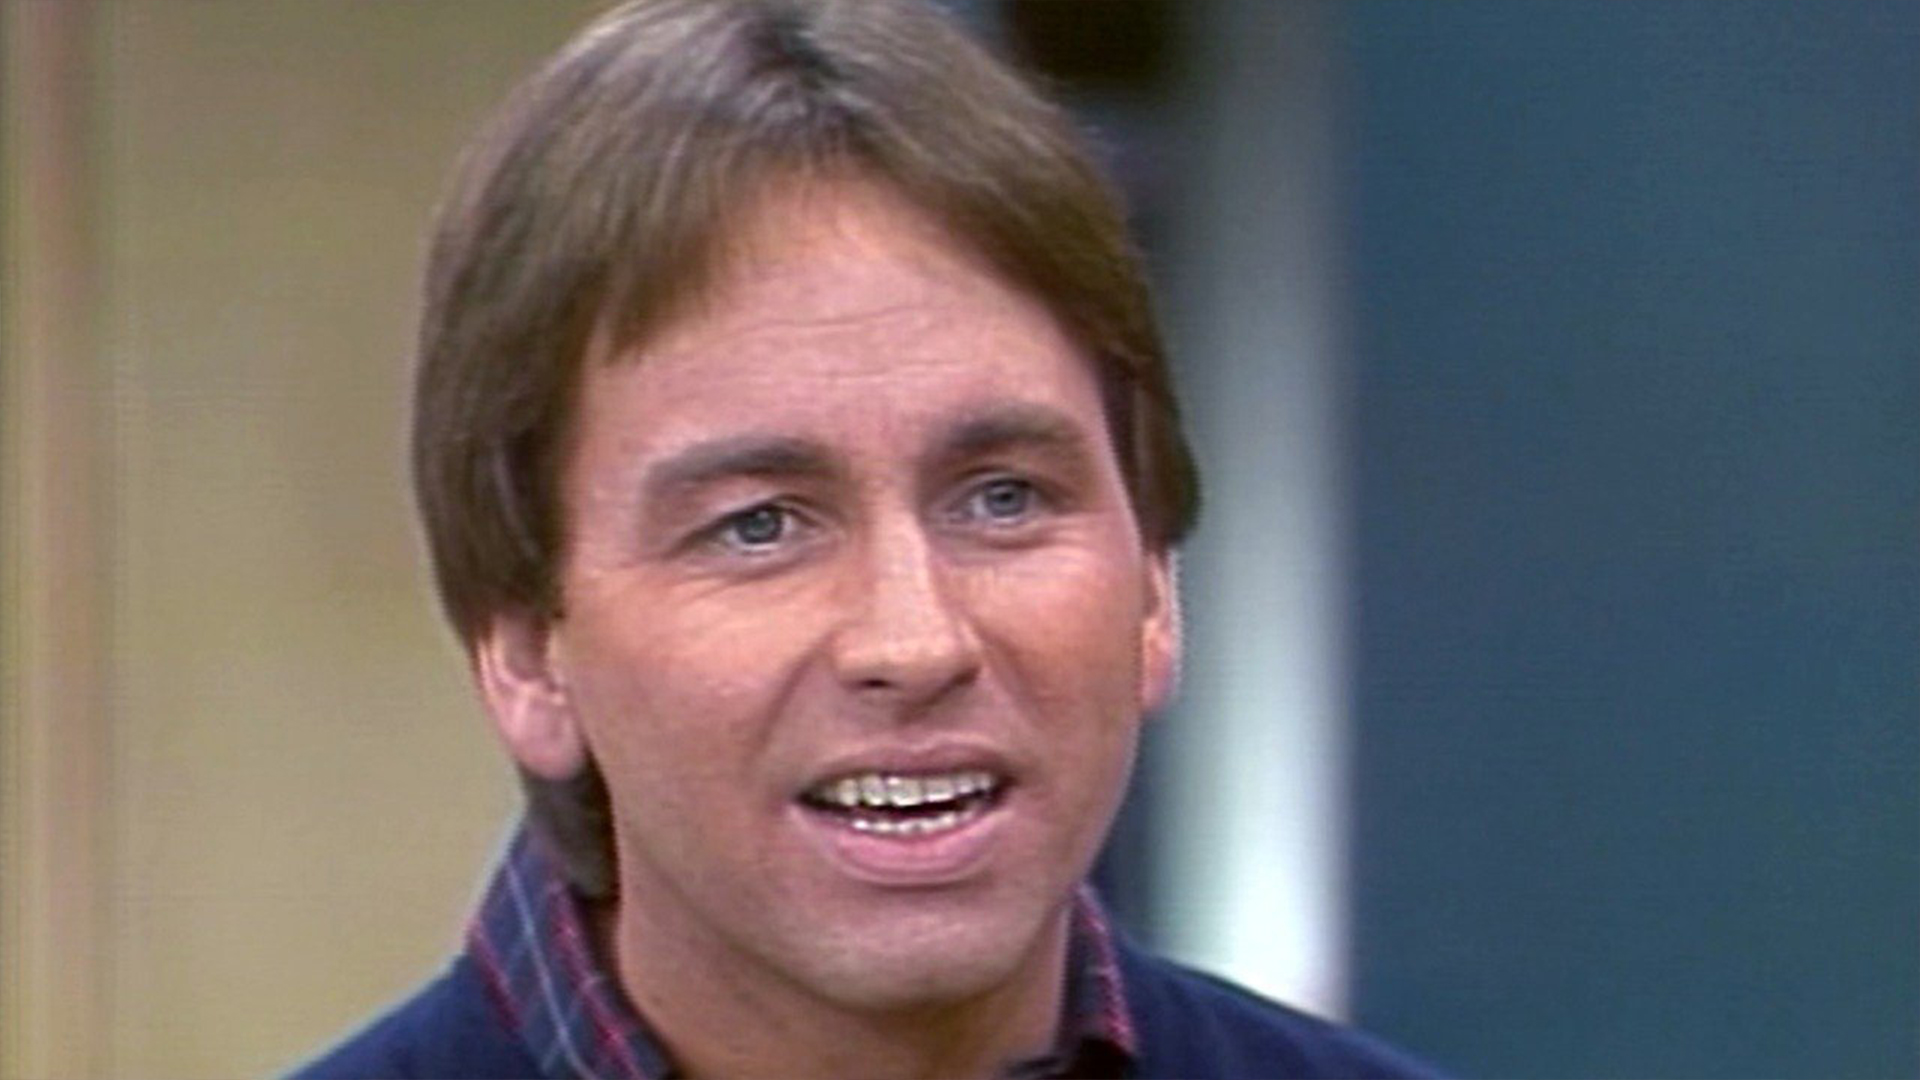 Three's Company Season 5 Episode 10 - Jack's Other Mother